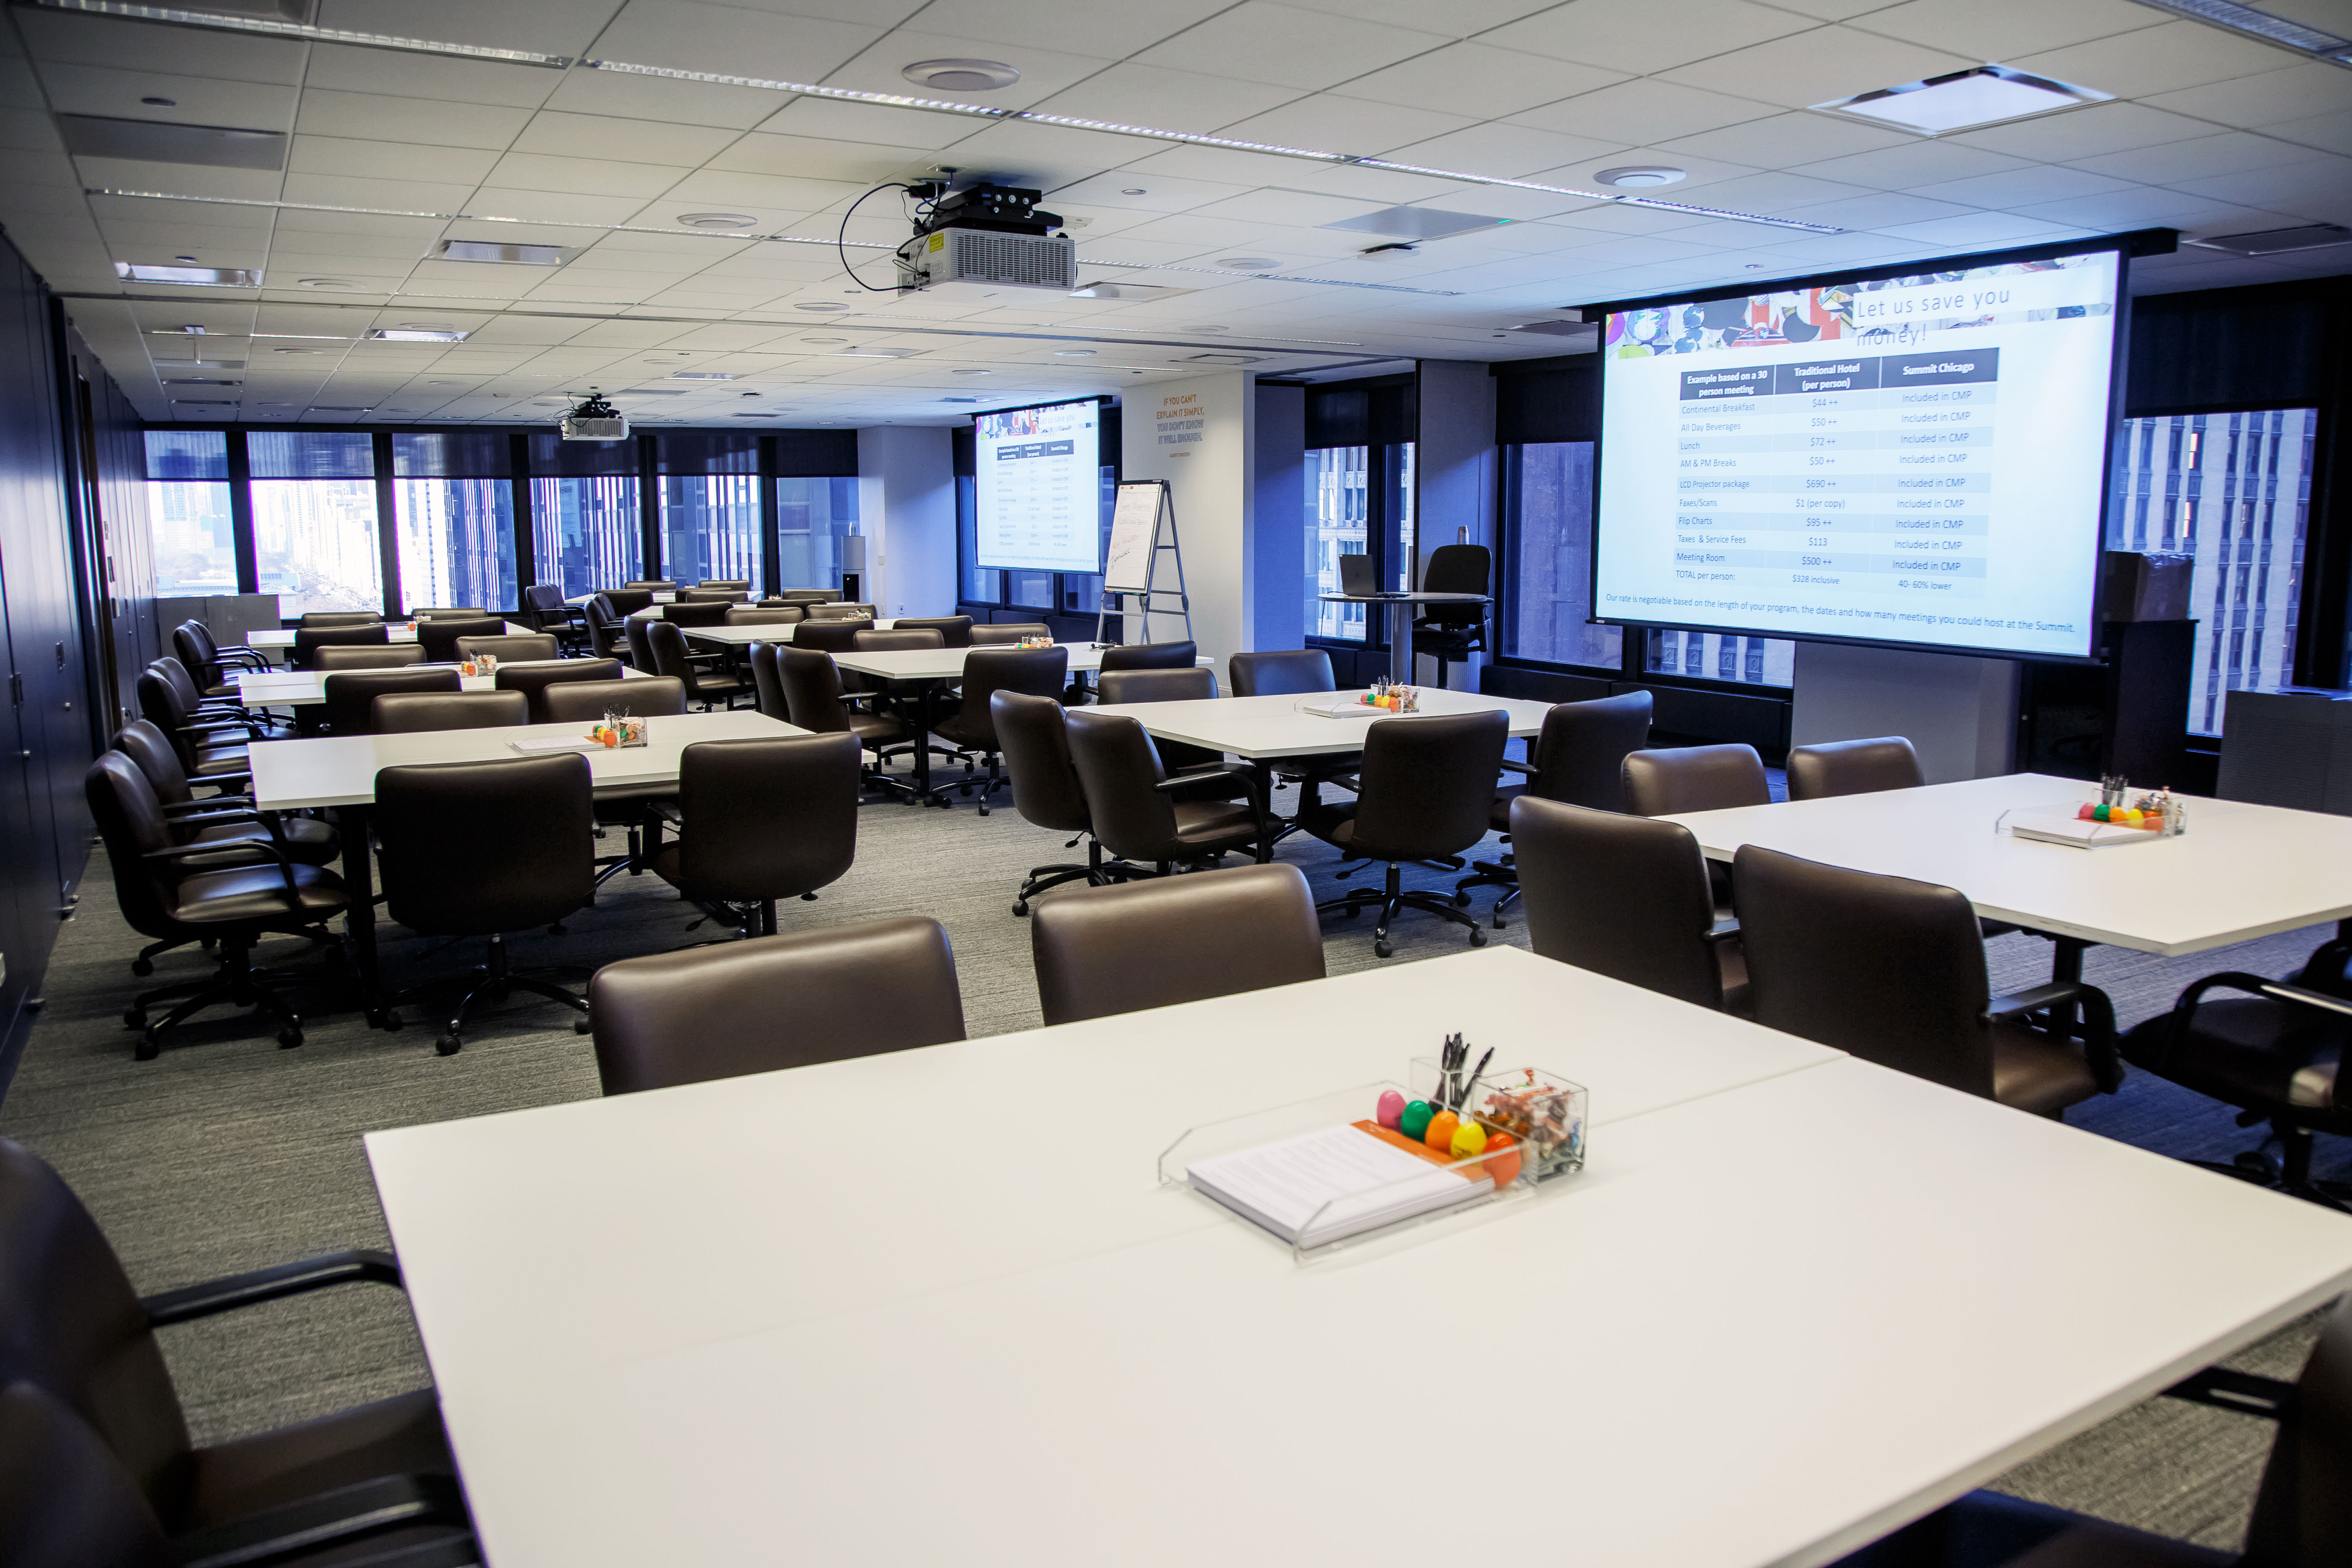 Chicago's premier destination for conferences and meetings